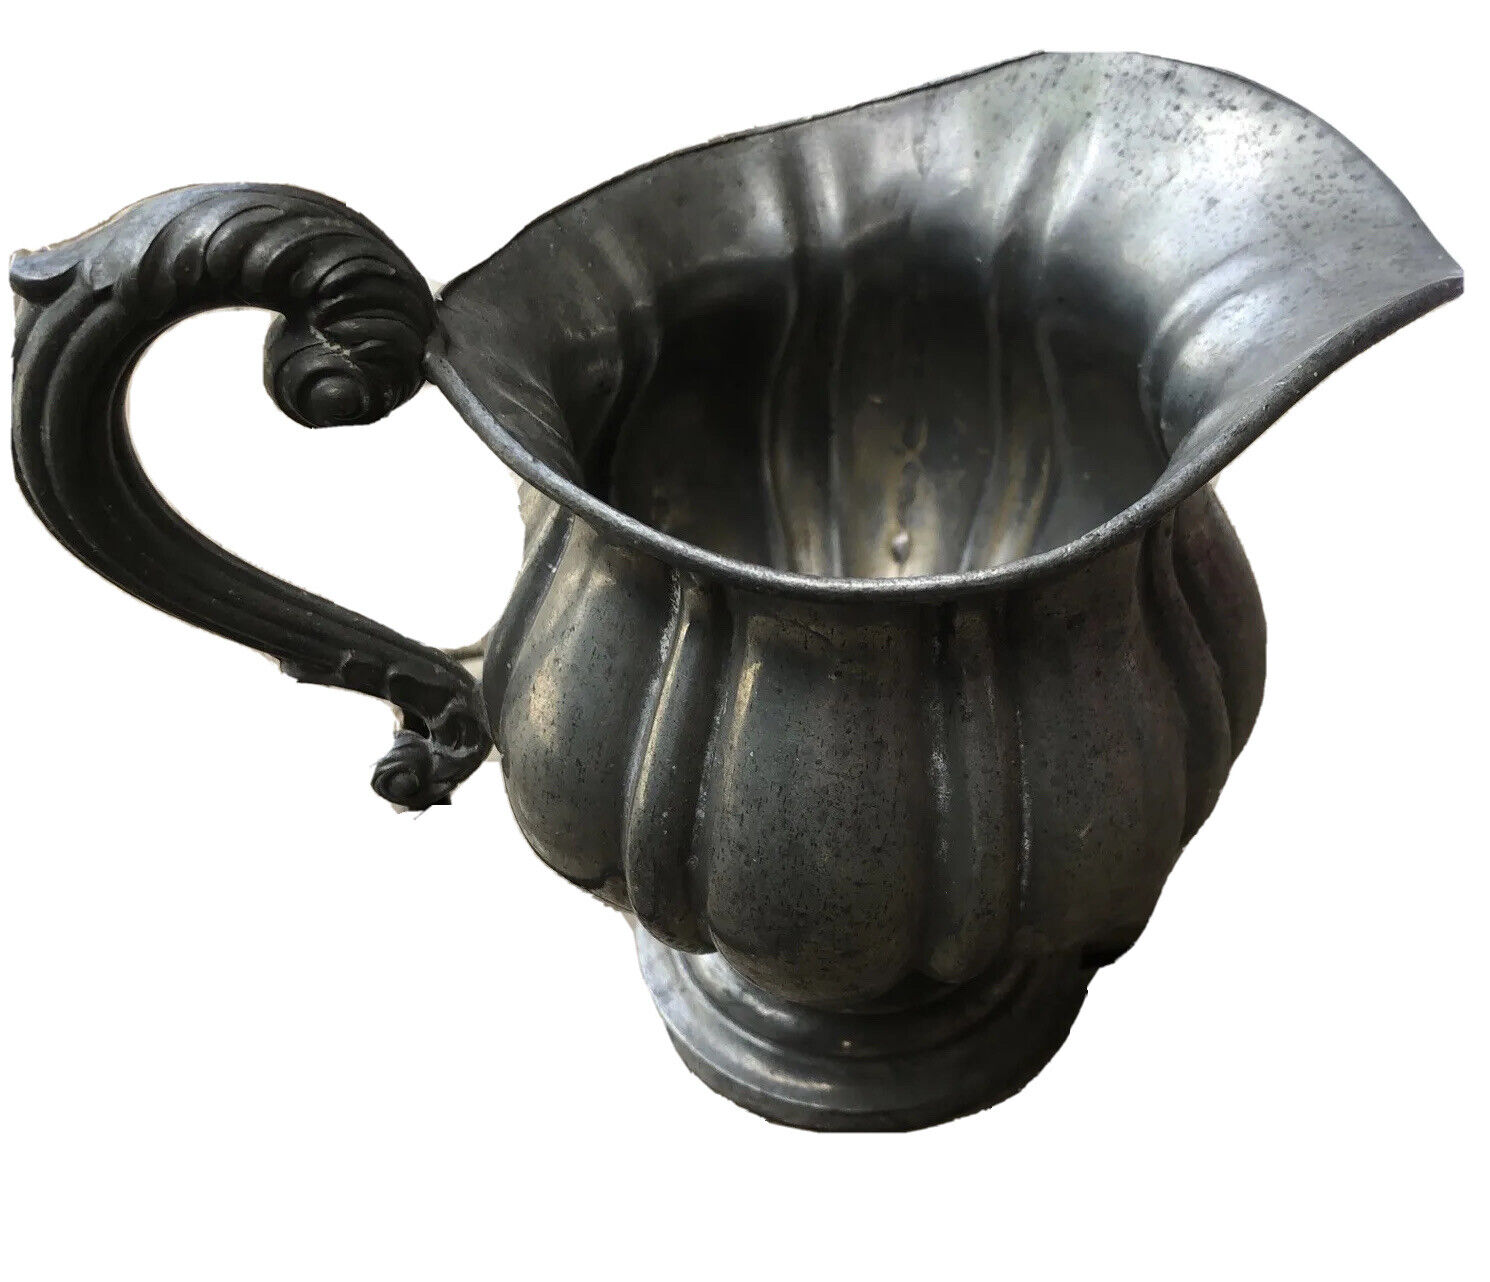 Antique Pewter Footed Creamer, Dixon & Son, England, c. 1835